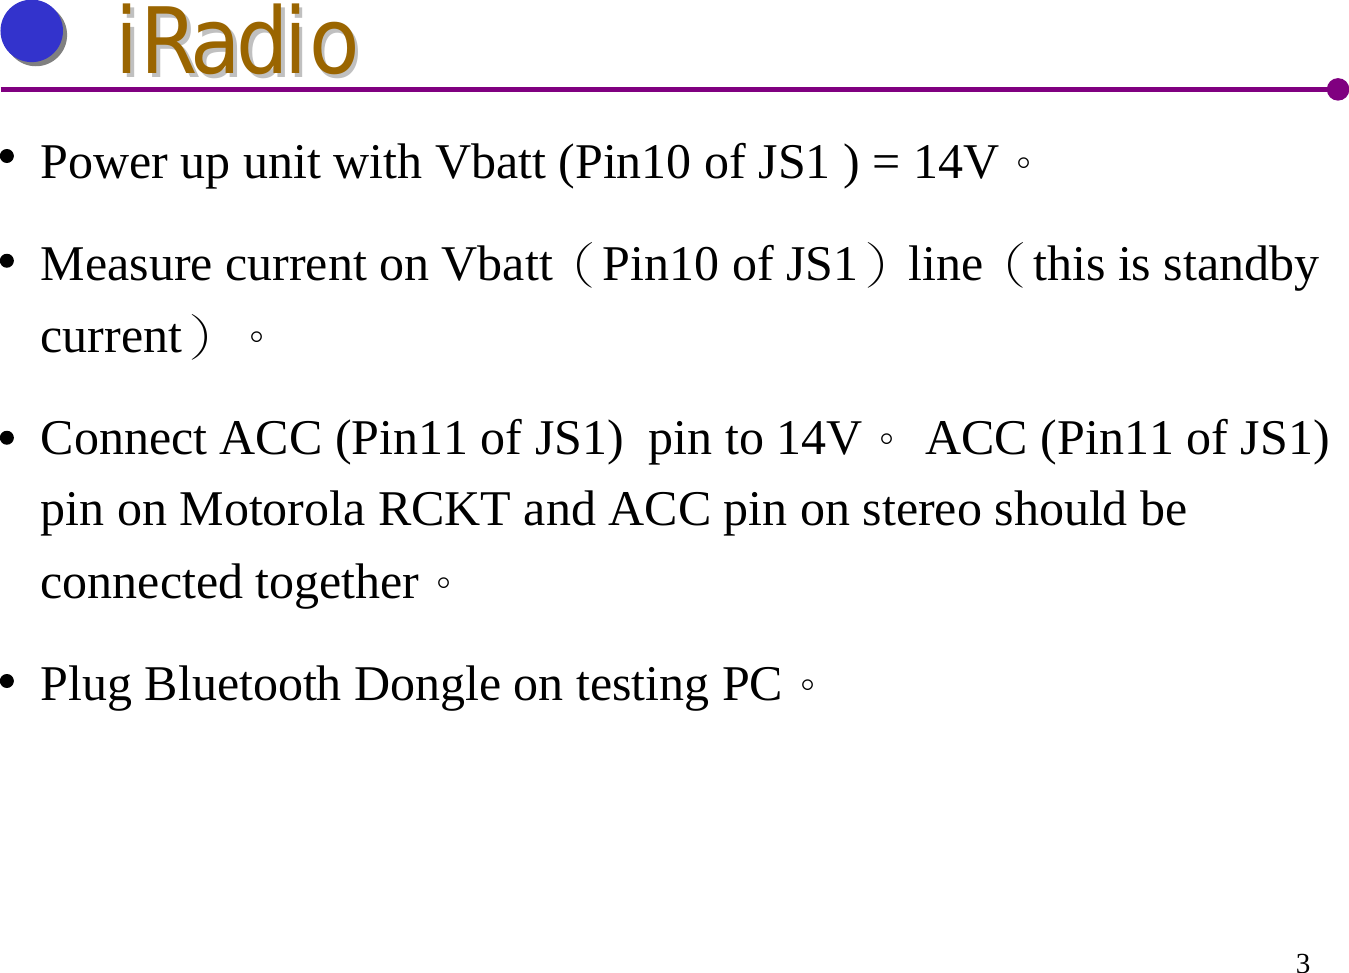 3iRadioiRadioPower up unit with Vbatt (Pin10 of JS1 ) = 14V。Measure current on Vbatt（Pin10 of JS1）line（this is standby current）。Connect ACC (Pin11 of JS1)  pin to 14V。ACC (Pin11 of JS1) pin on Motorola RCKT and ACC pin on stereo should be connected together。Plug Bluetooth Dongle on testing PC。